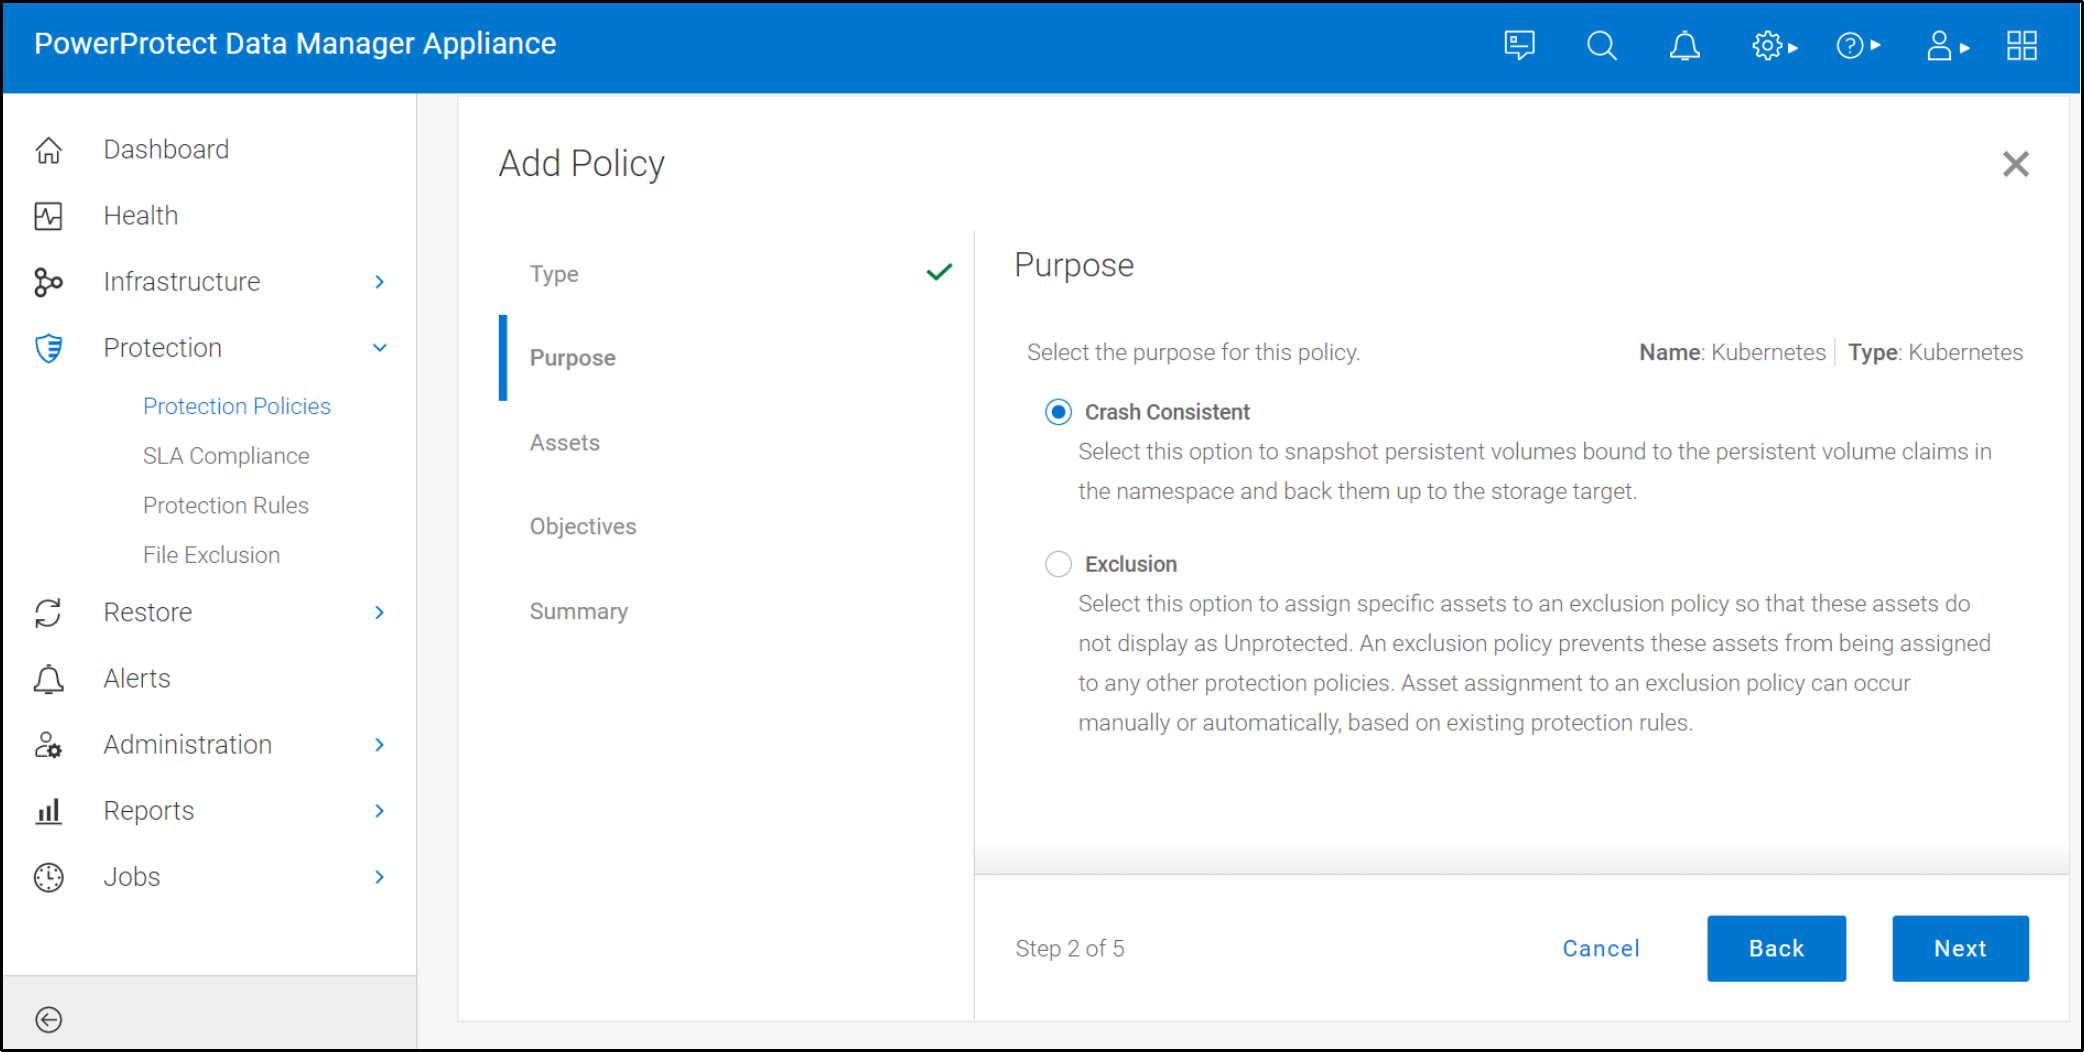 The image shows the protection policy purpose options for Kubernetes backup.